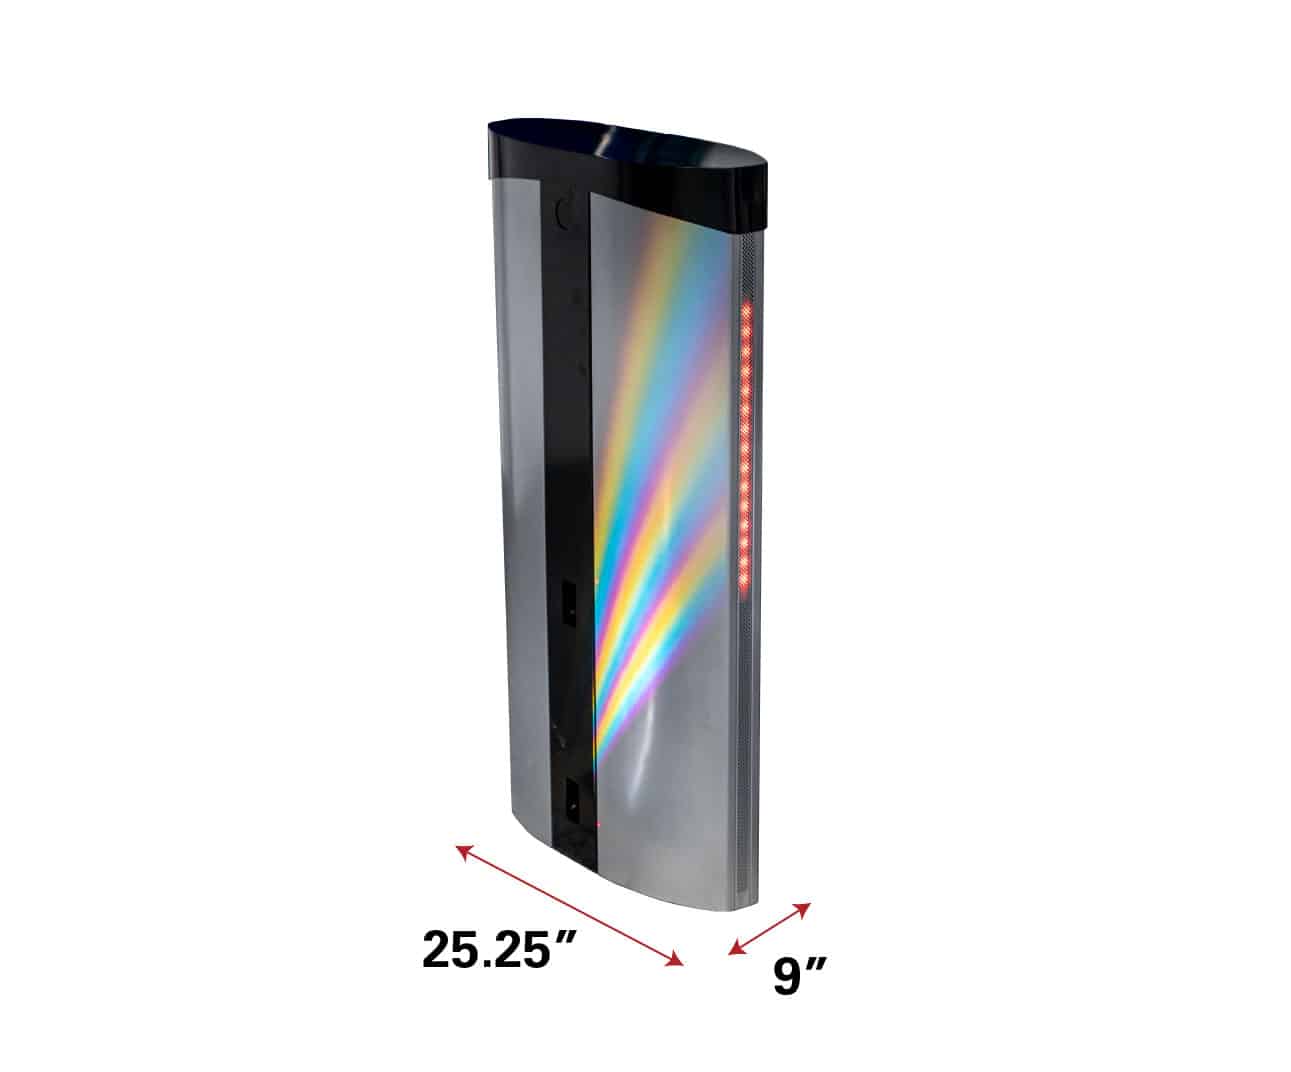 The footprint of a single alignment tower is 25.25 inches long and 9 inches wide, taking up relatively little floor space. The tower is silver and black